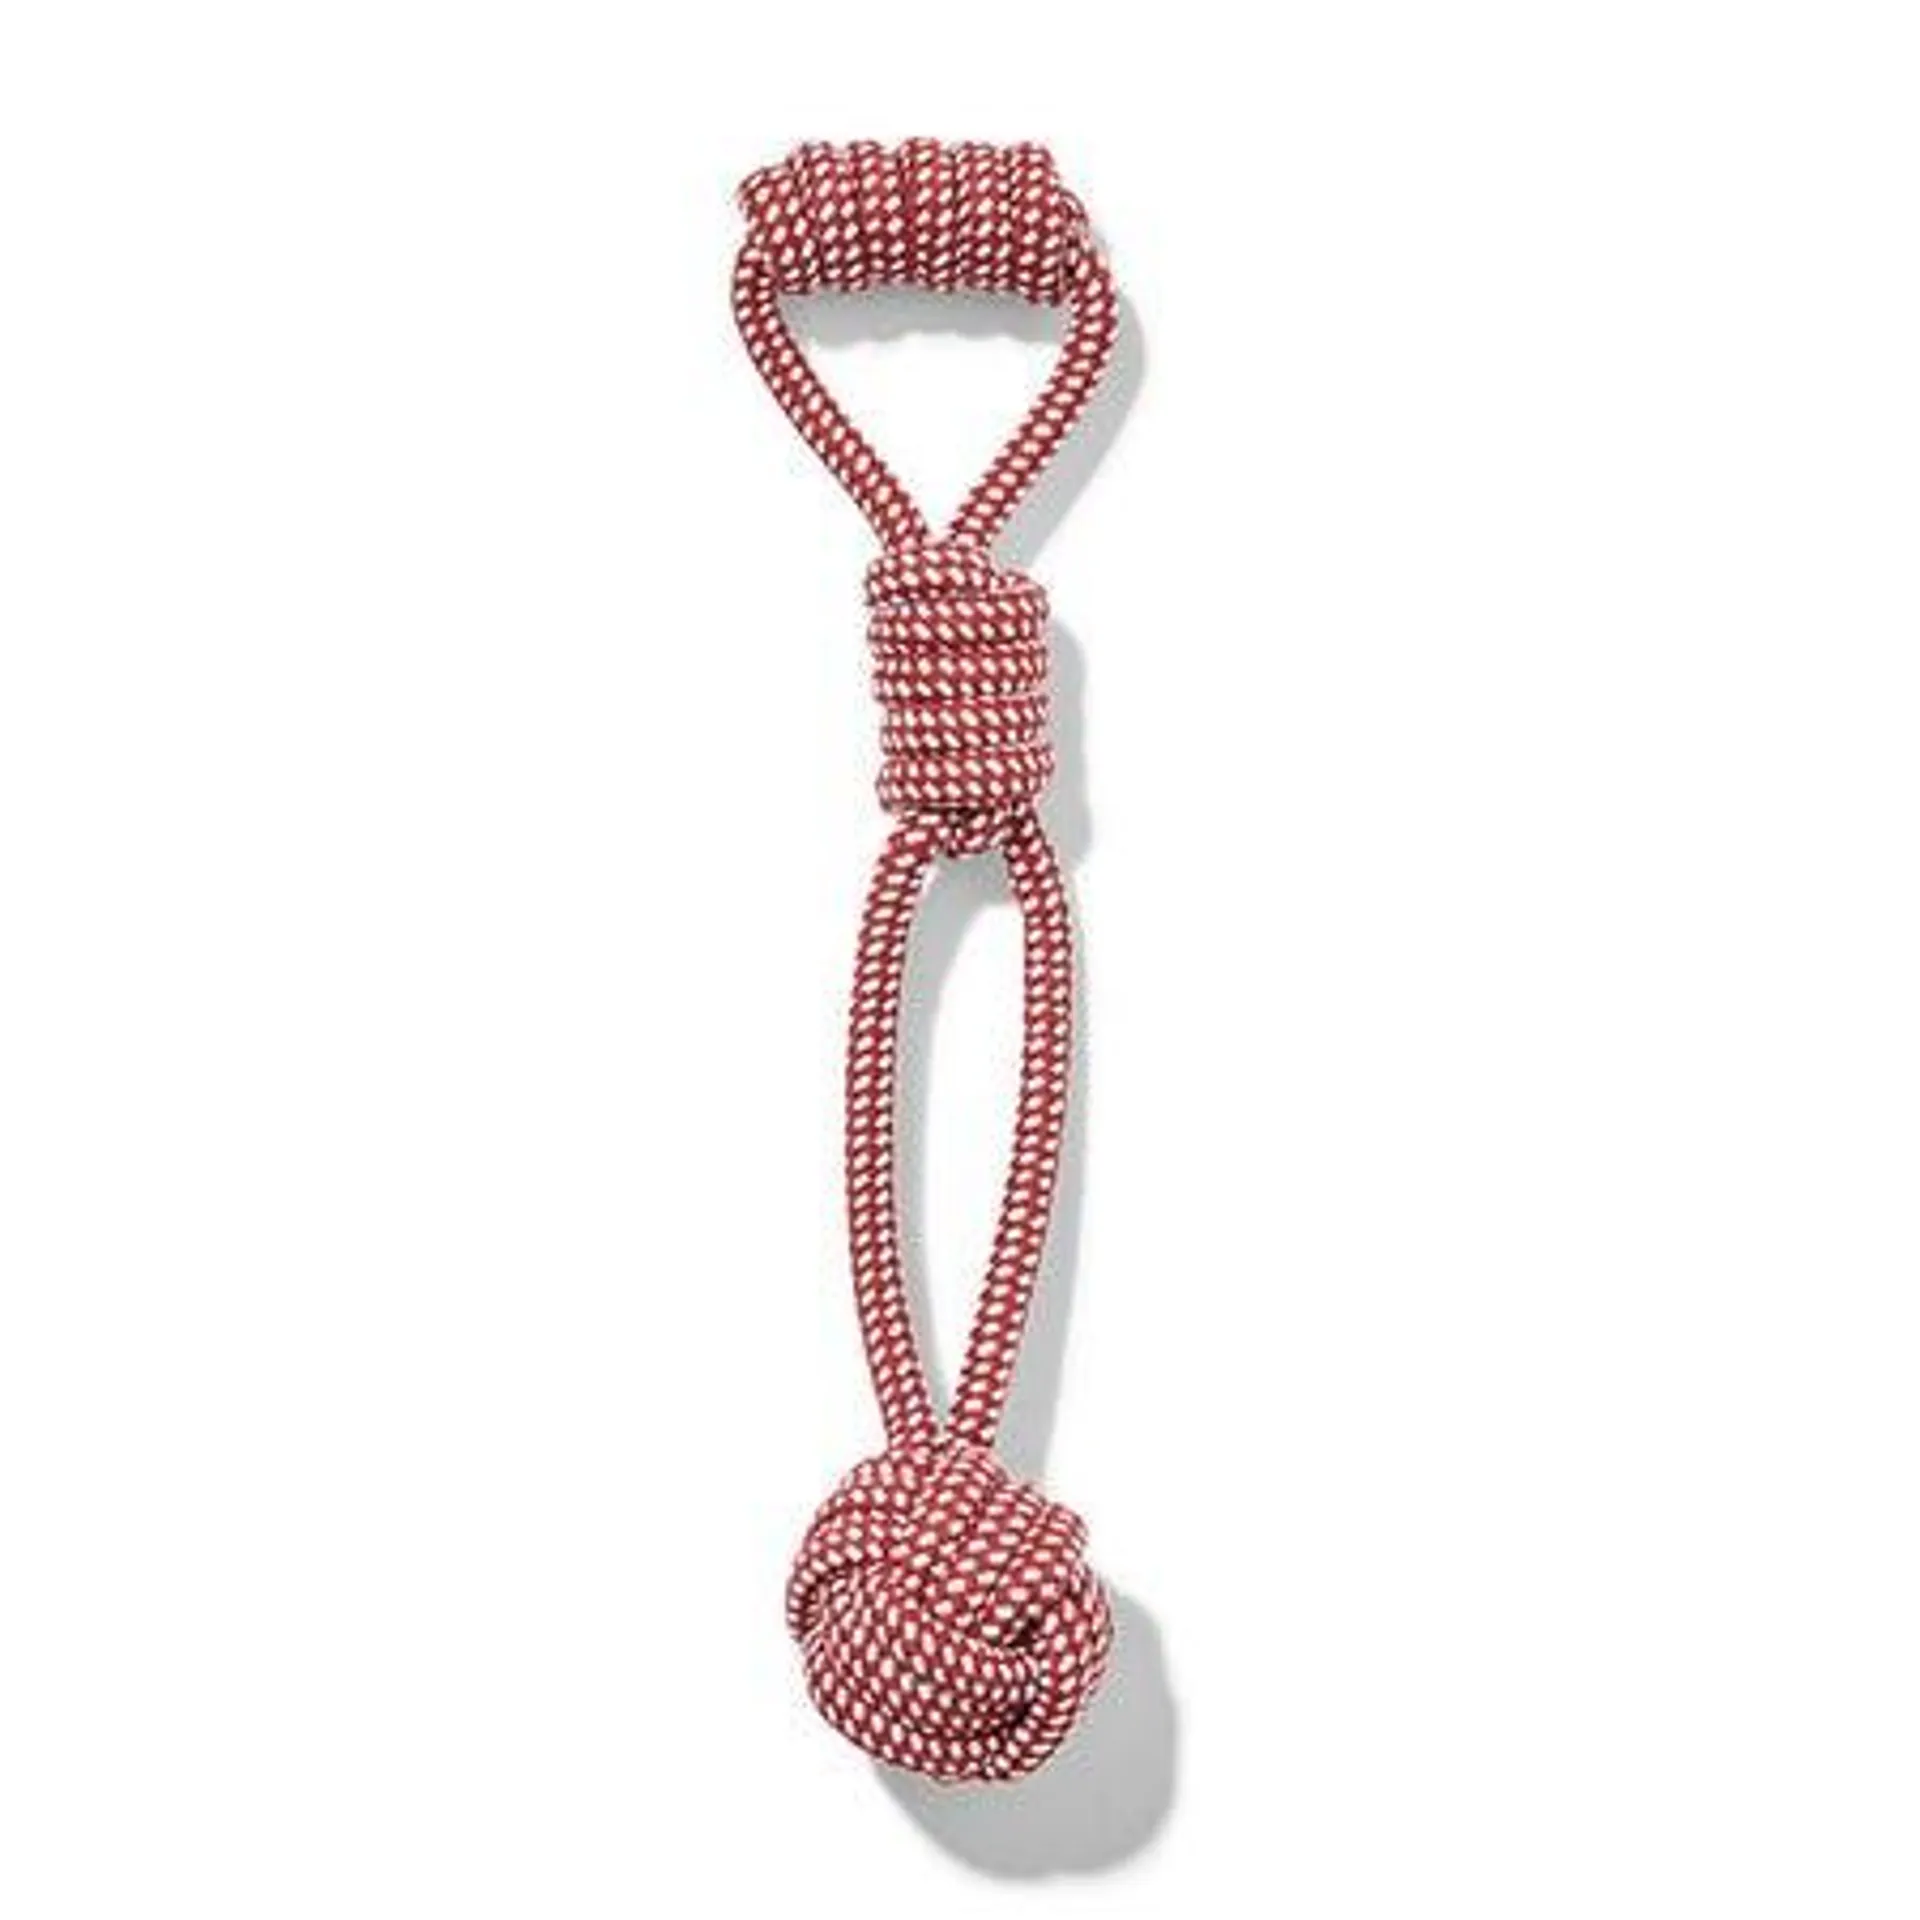 Juni Rope Ball Tug with Handle Dog Toy Red